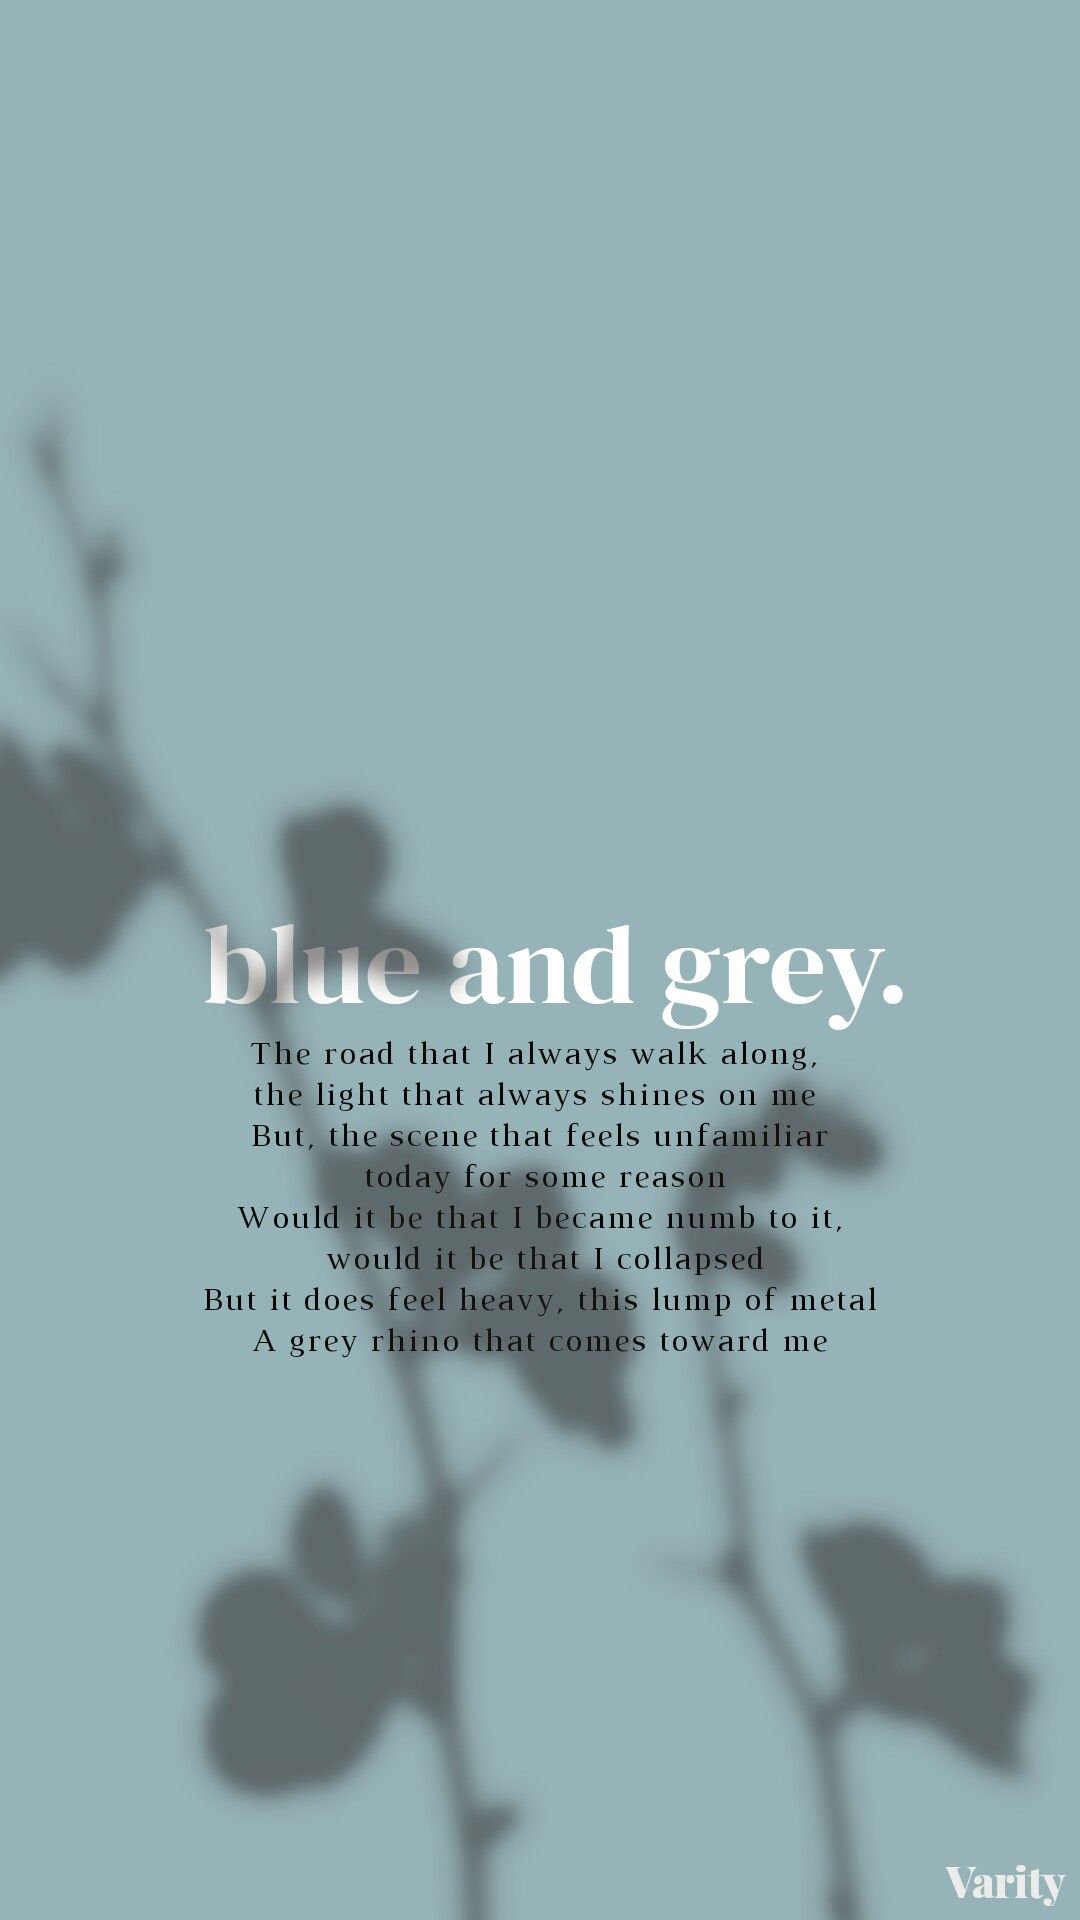 Blue & Grey By BTS Aesthetic Wallpaper Lockscreens. Bts Lyrics Quotes, Bts Wallpaper Lyrics, Bts Quotes